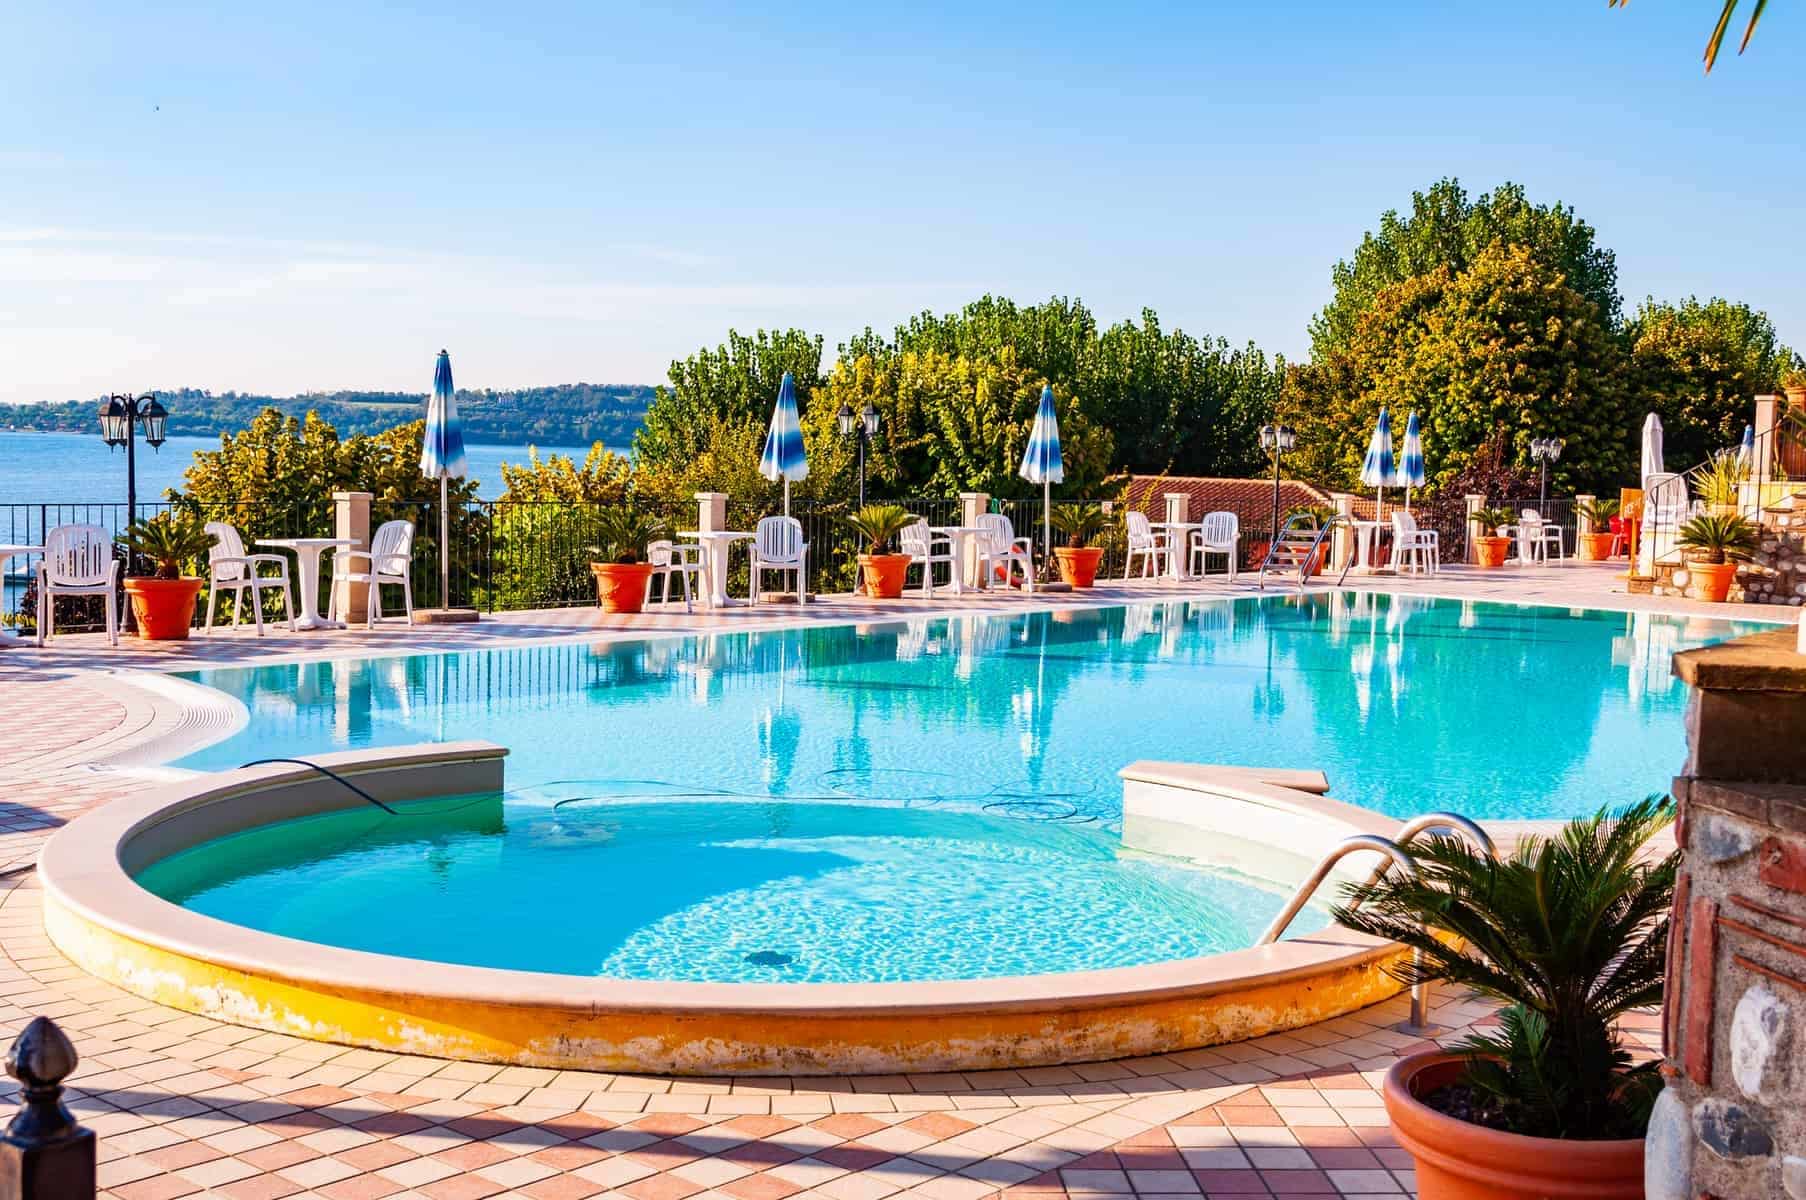 Camping La Ca, Garda Lake, Lombardy, Italy - September 12, 2019: Outdoor pool with vibrant crystal water, parasols and deck chairs located on the coast of Garda lake in amazing La Ca camping in Italy